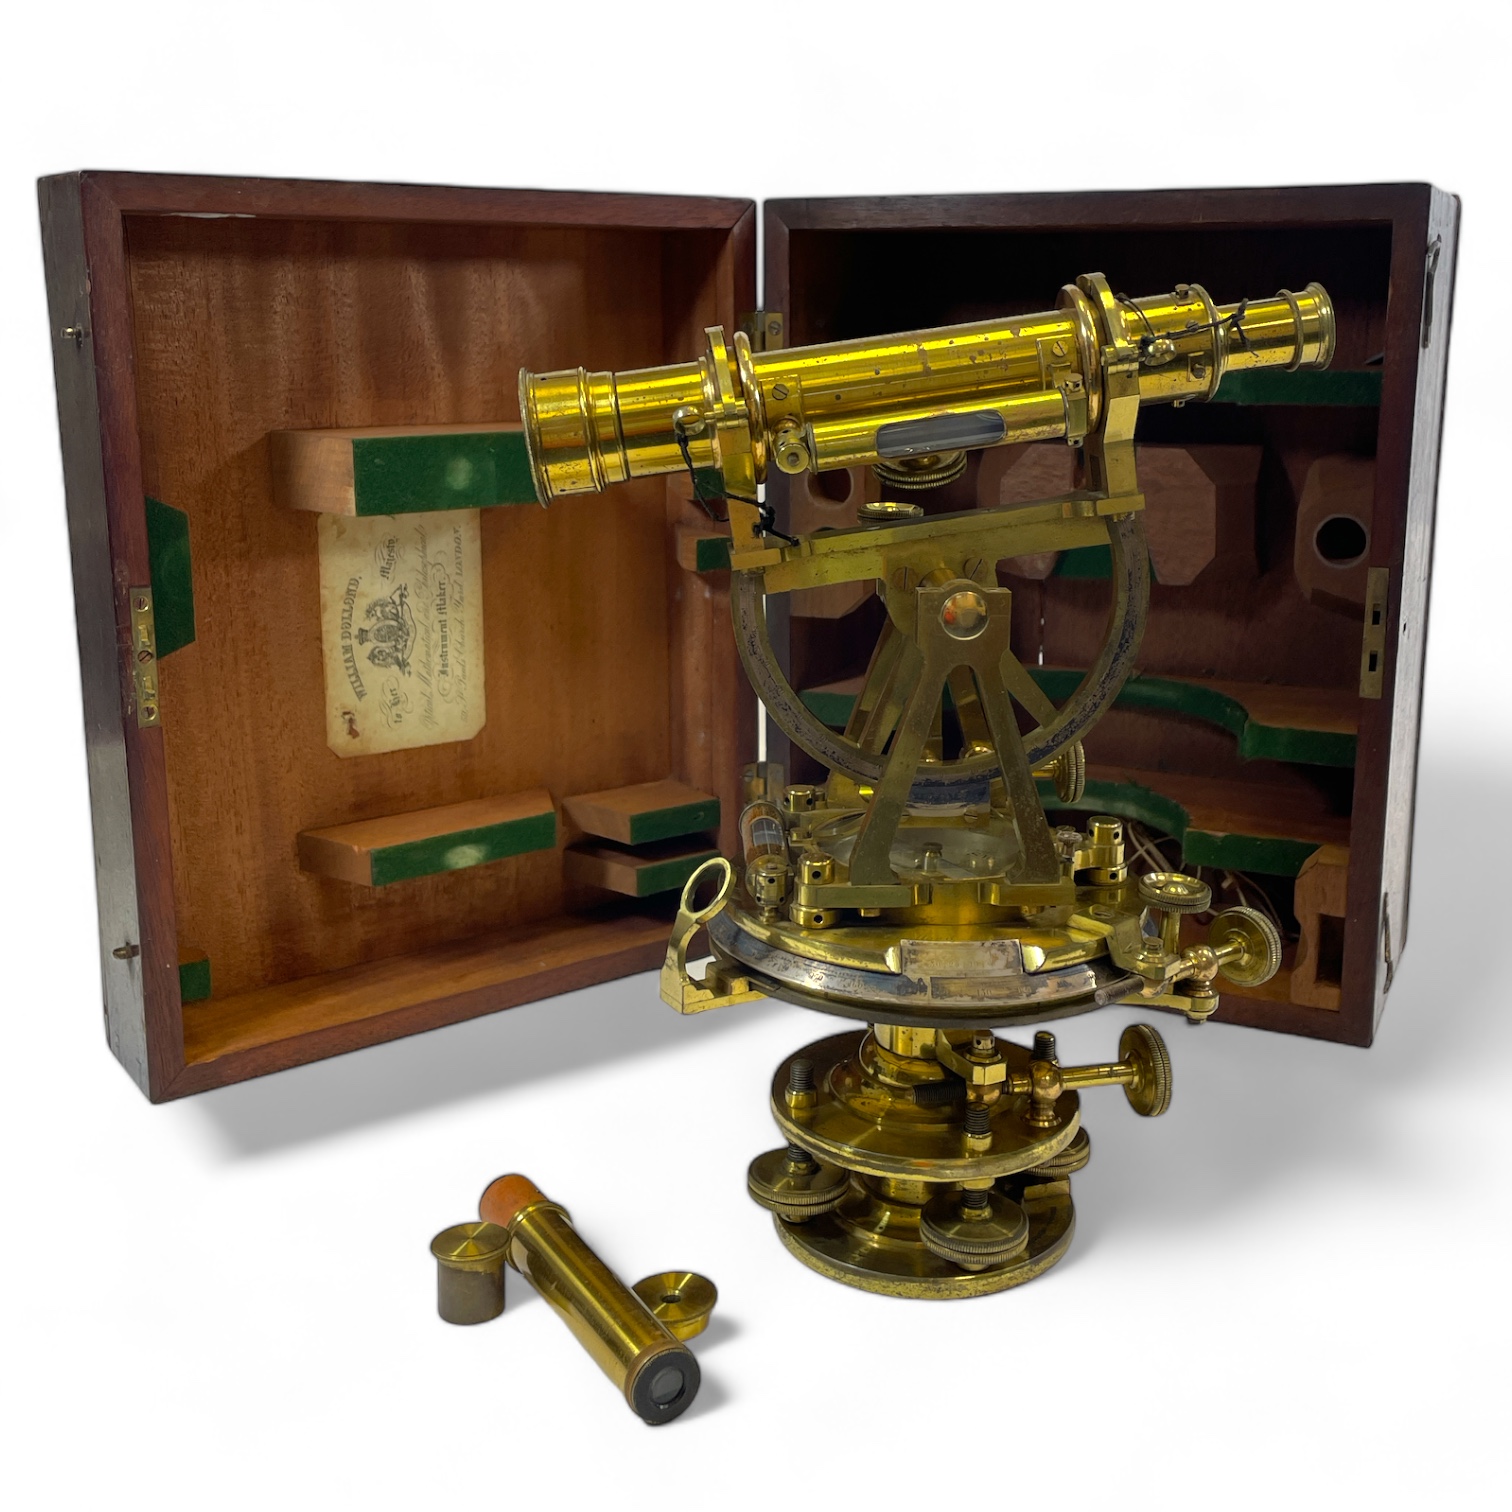 A theodolite by William Dollond - instrument maker to Her Majesty, with attachments in a fitted box.